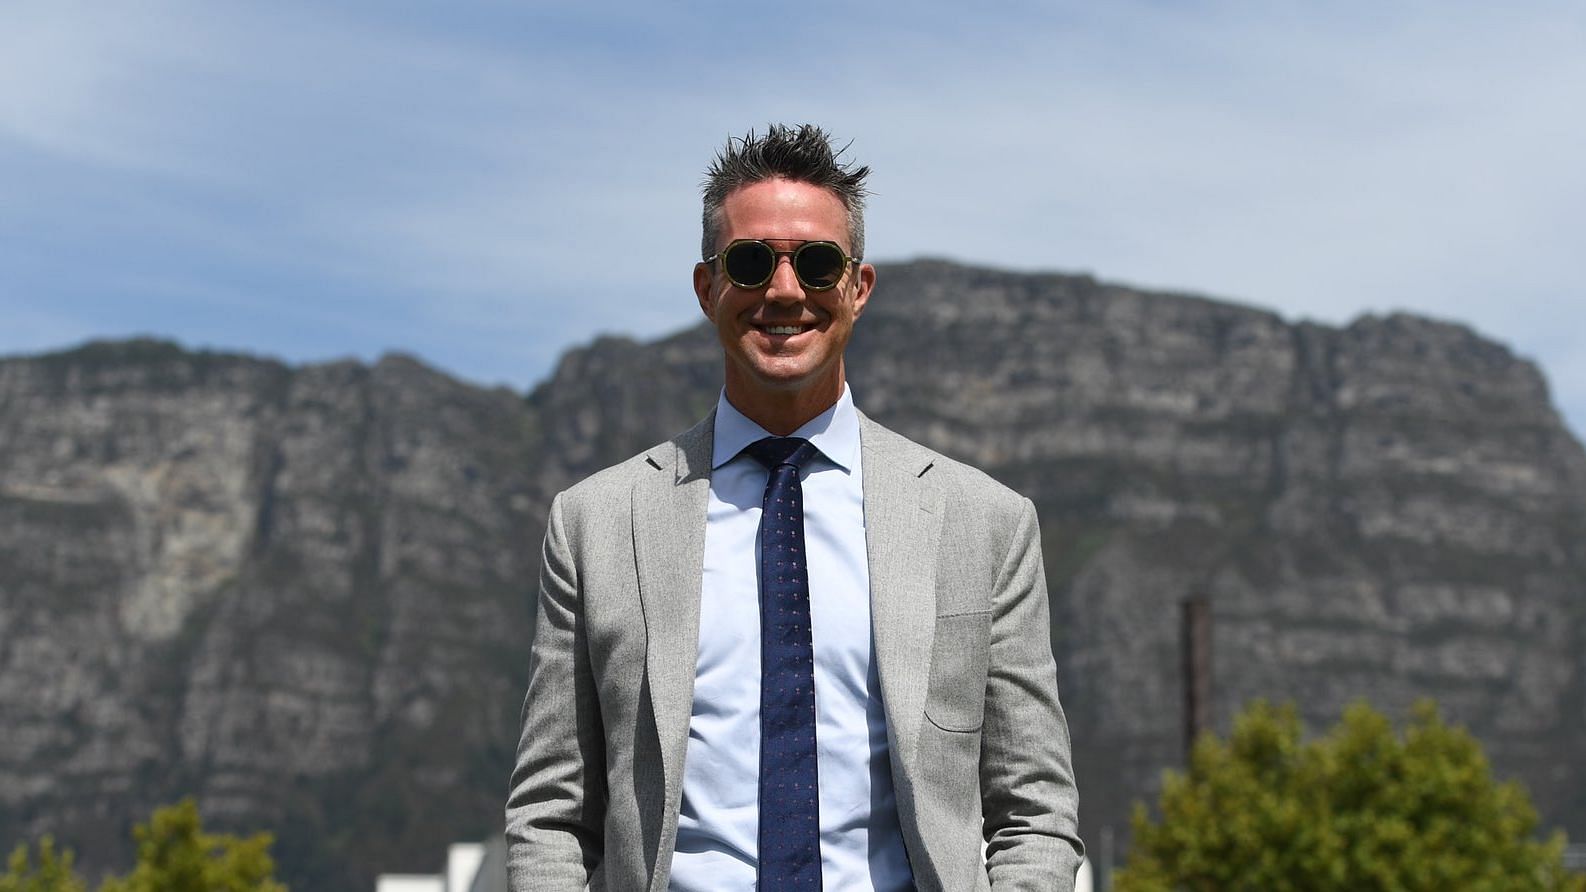 Kevin Pietersen had led the England cricket team in three Tests and 12 ODIs in his career.